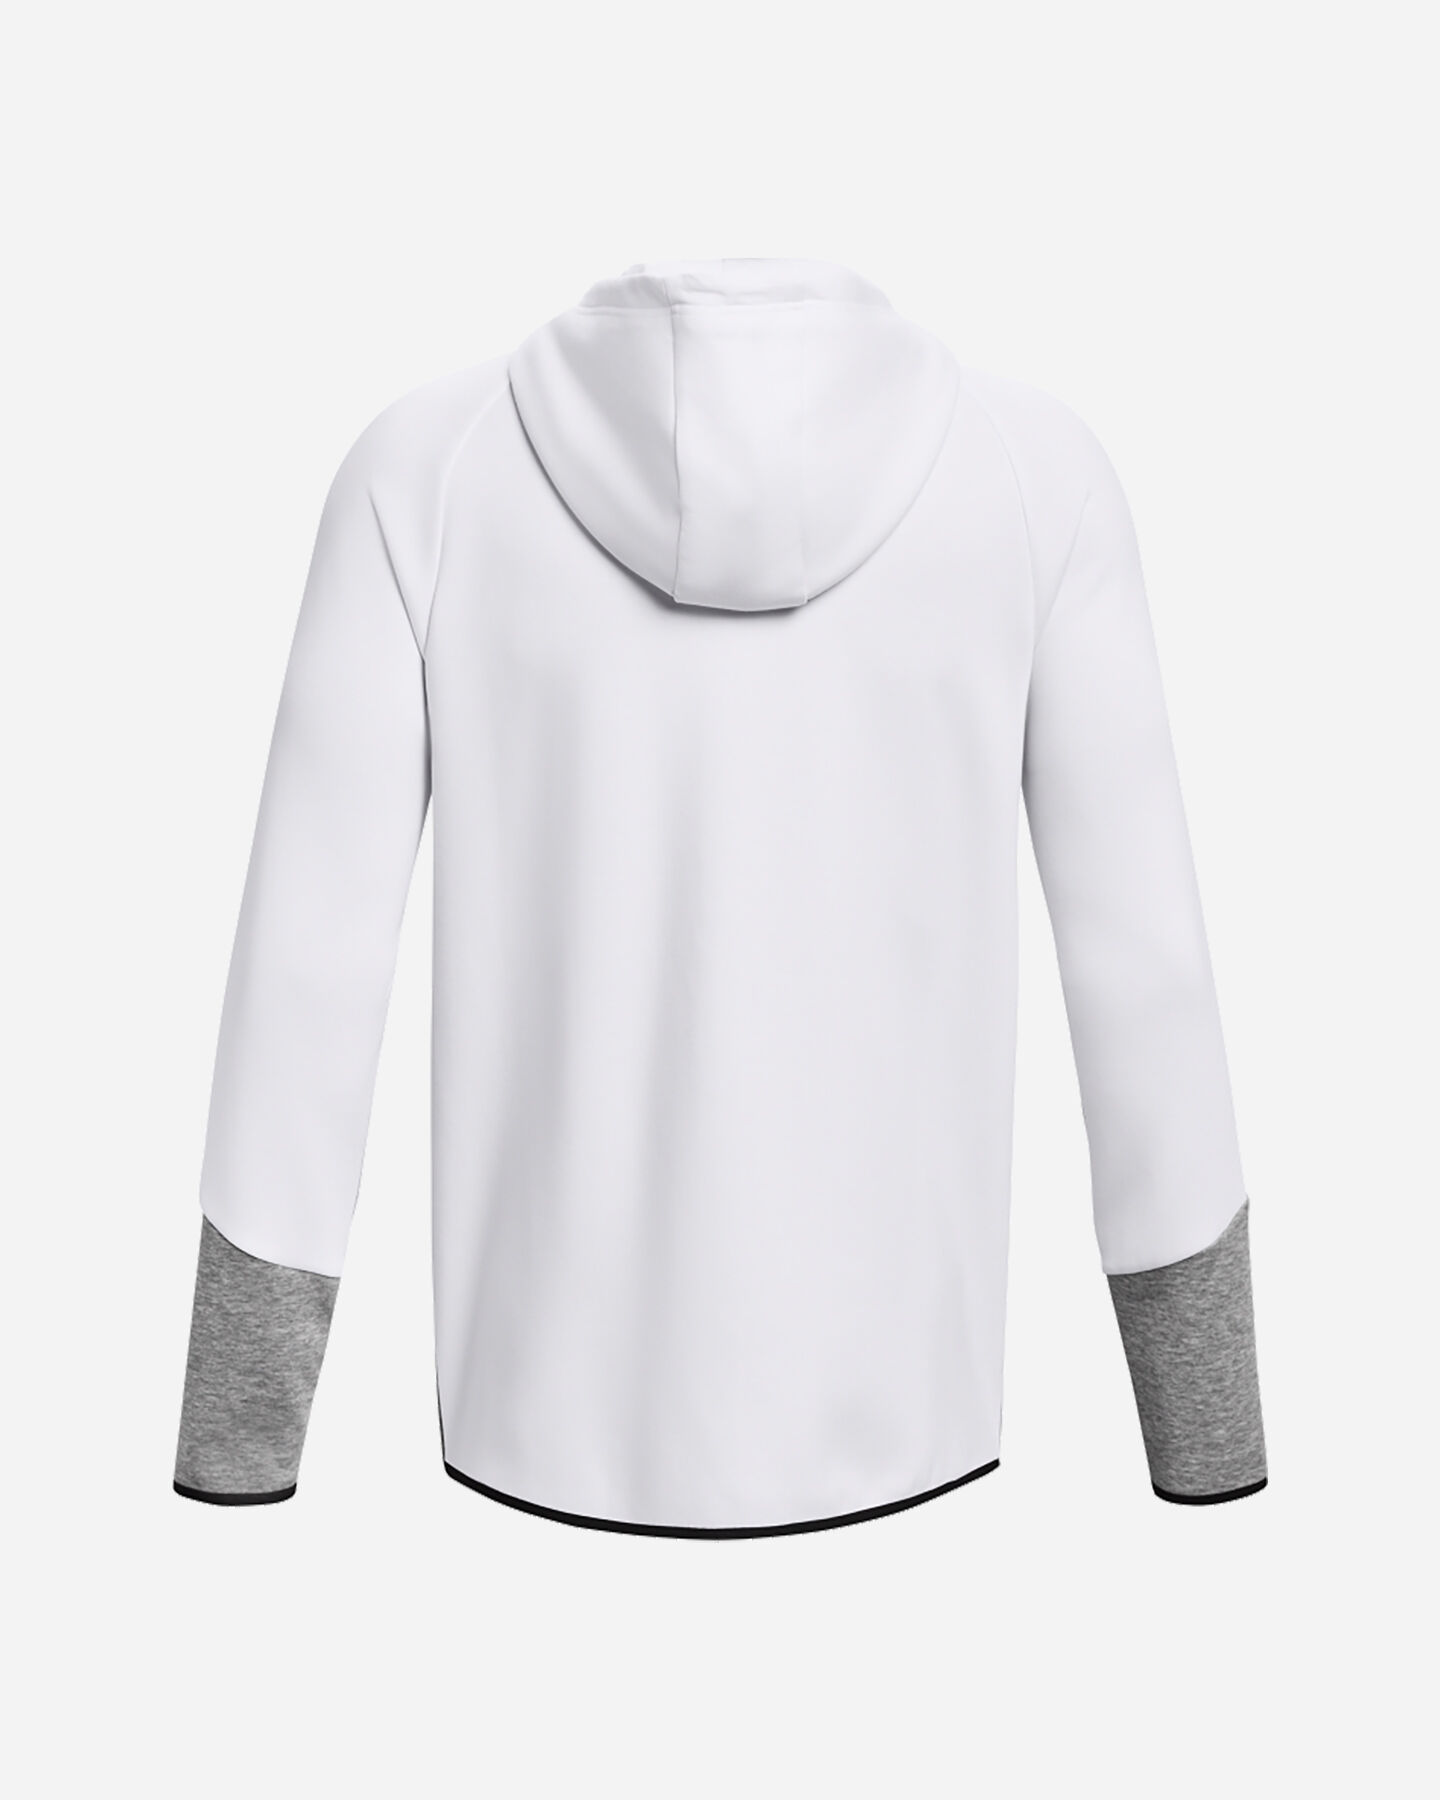  Felpa UNDER ARMOUR UNSTOPPABLEKNIT M S5579651|0012|XS scatto 1